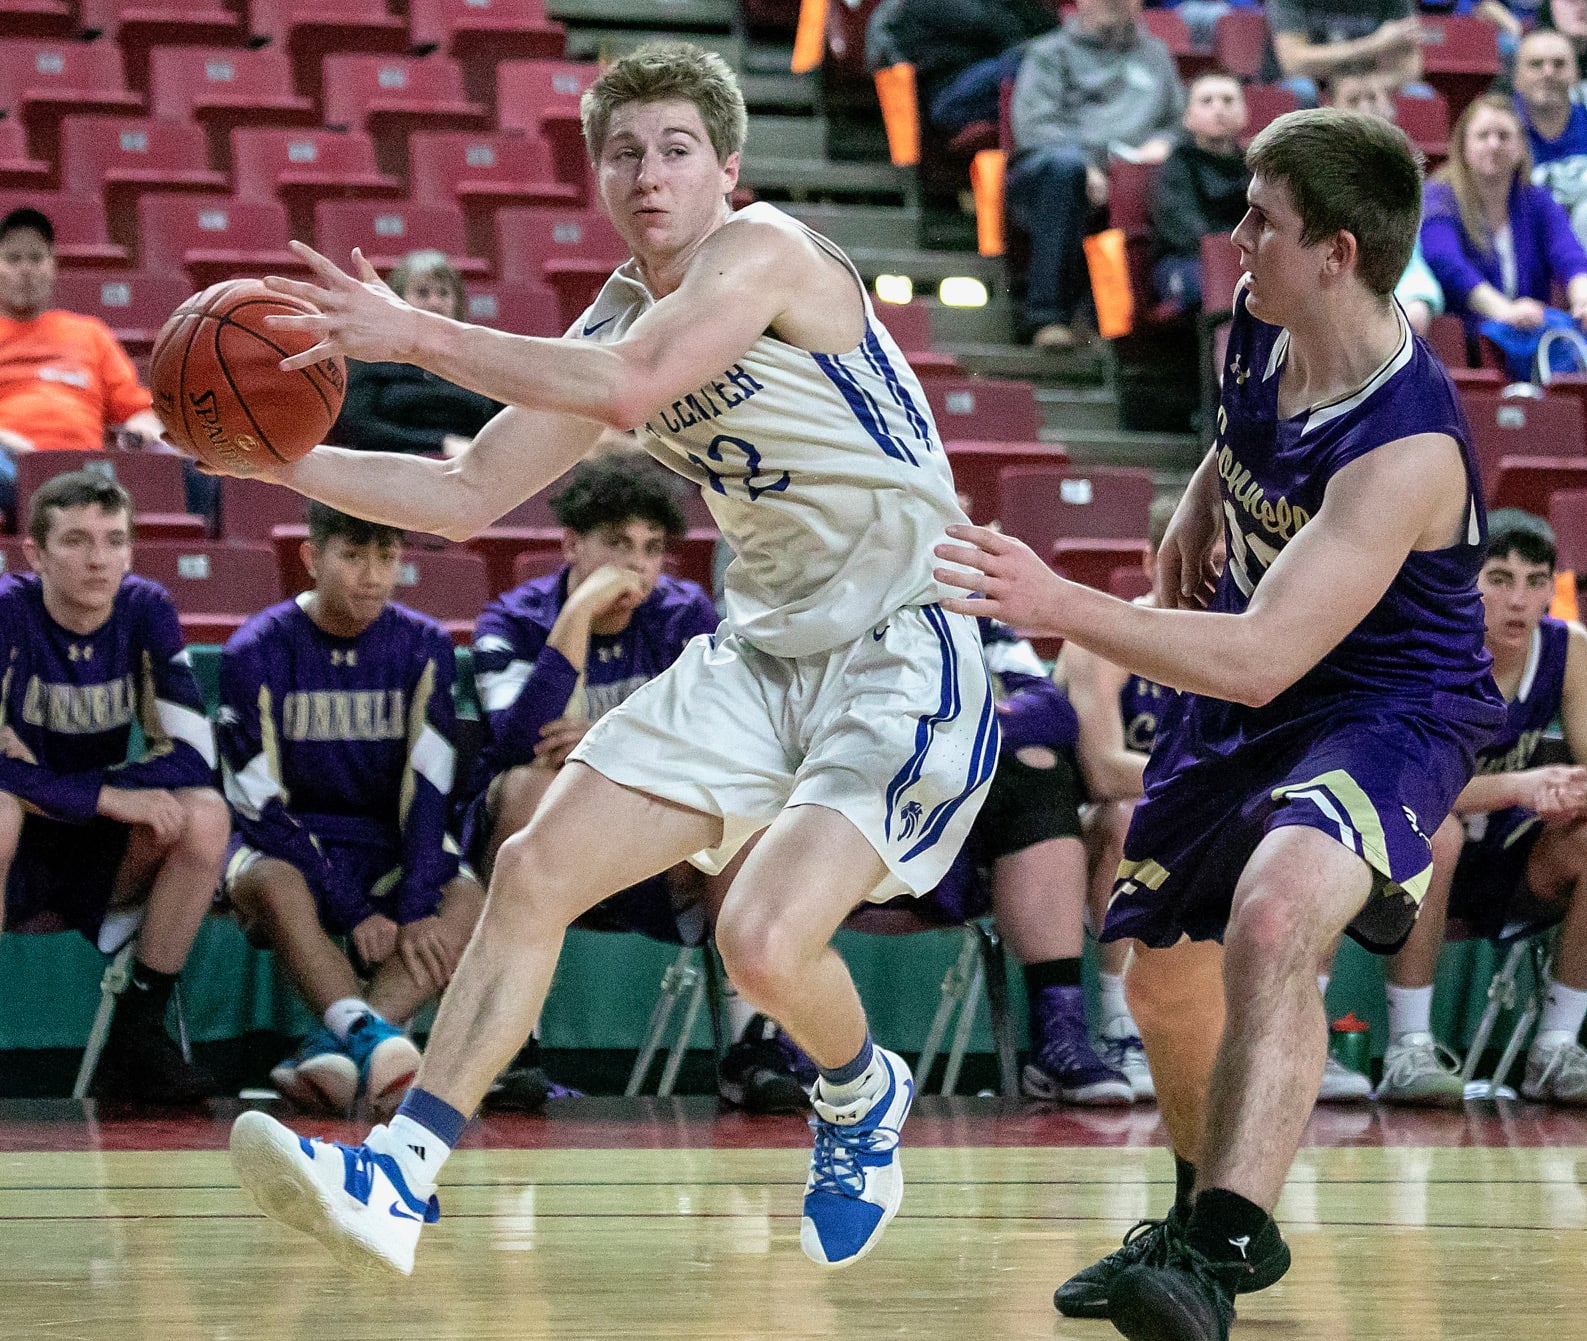 La Center's Avery Seter (12), grabs an errant pass before taking a shot against Connell's Austin Smith (13), during the WIAA 1A boys state tournament on Thursday, Feb. 28, 2019, at the Yakima Valley SunDome. The La Center Wildcats defeated the Connell Eagles 68-45.